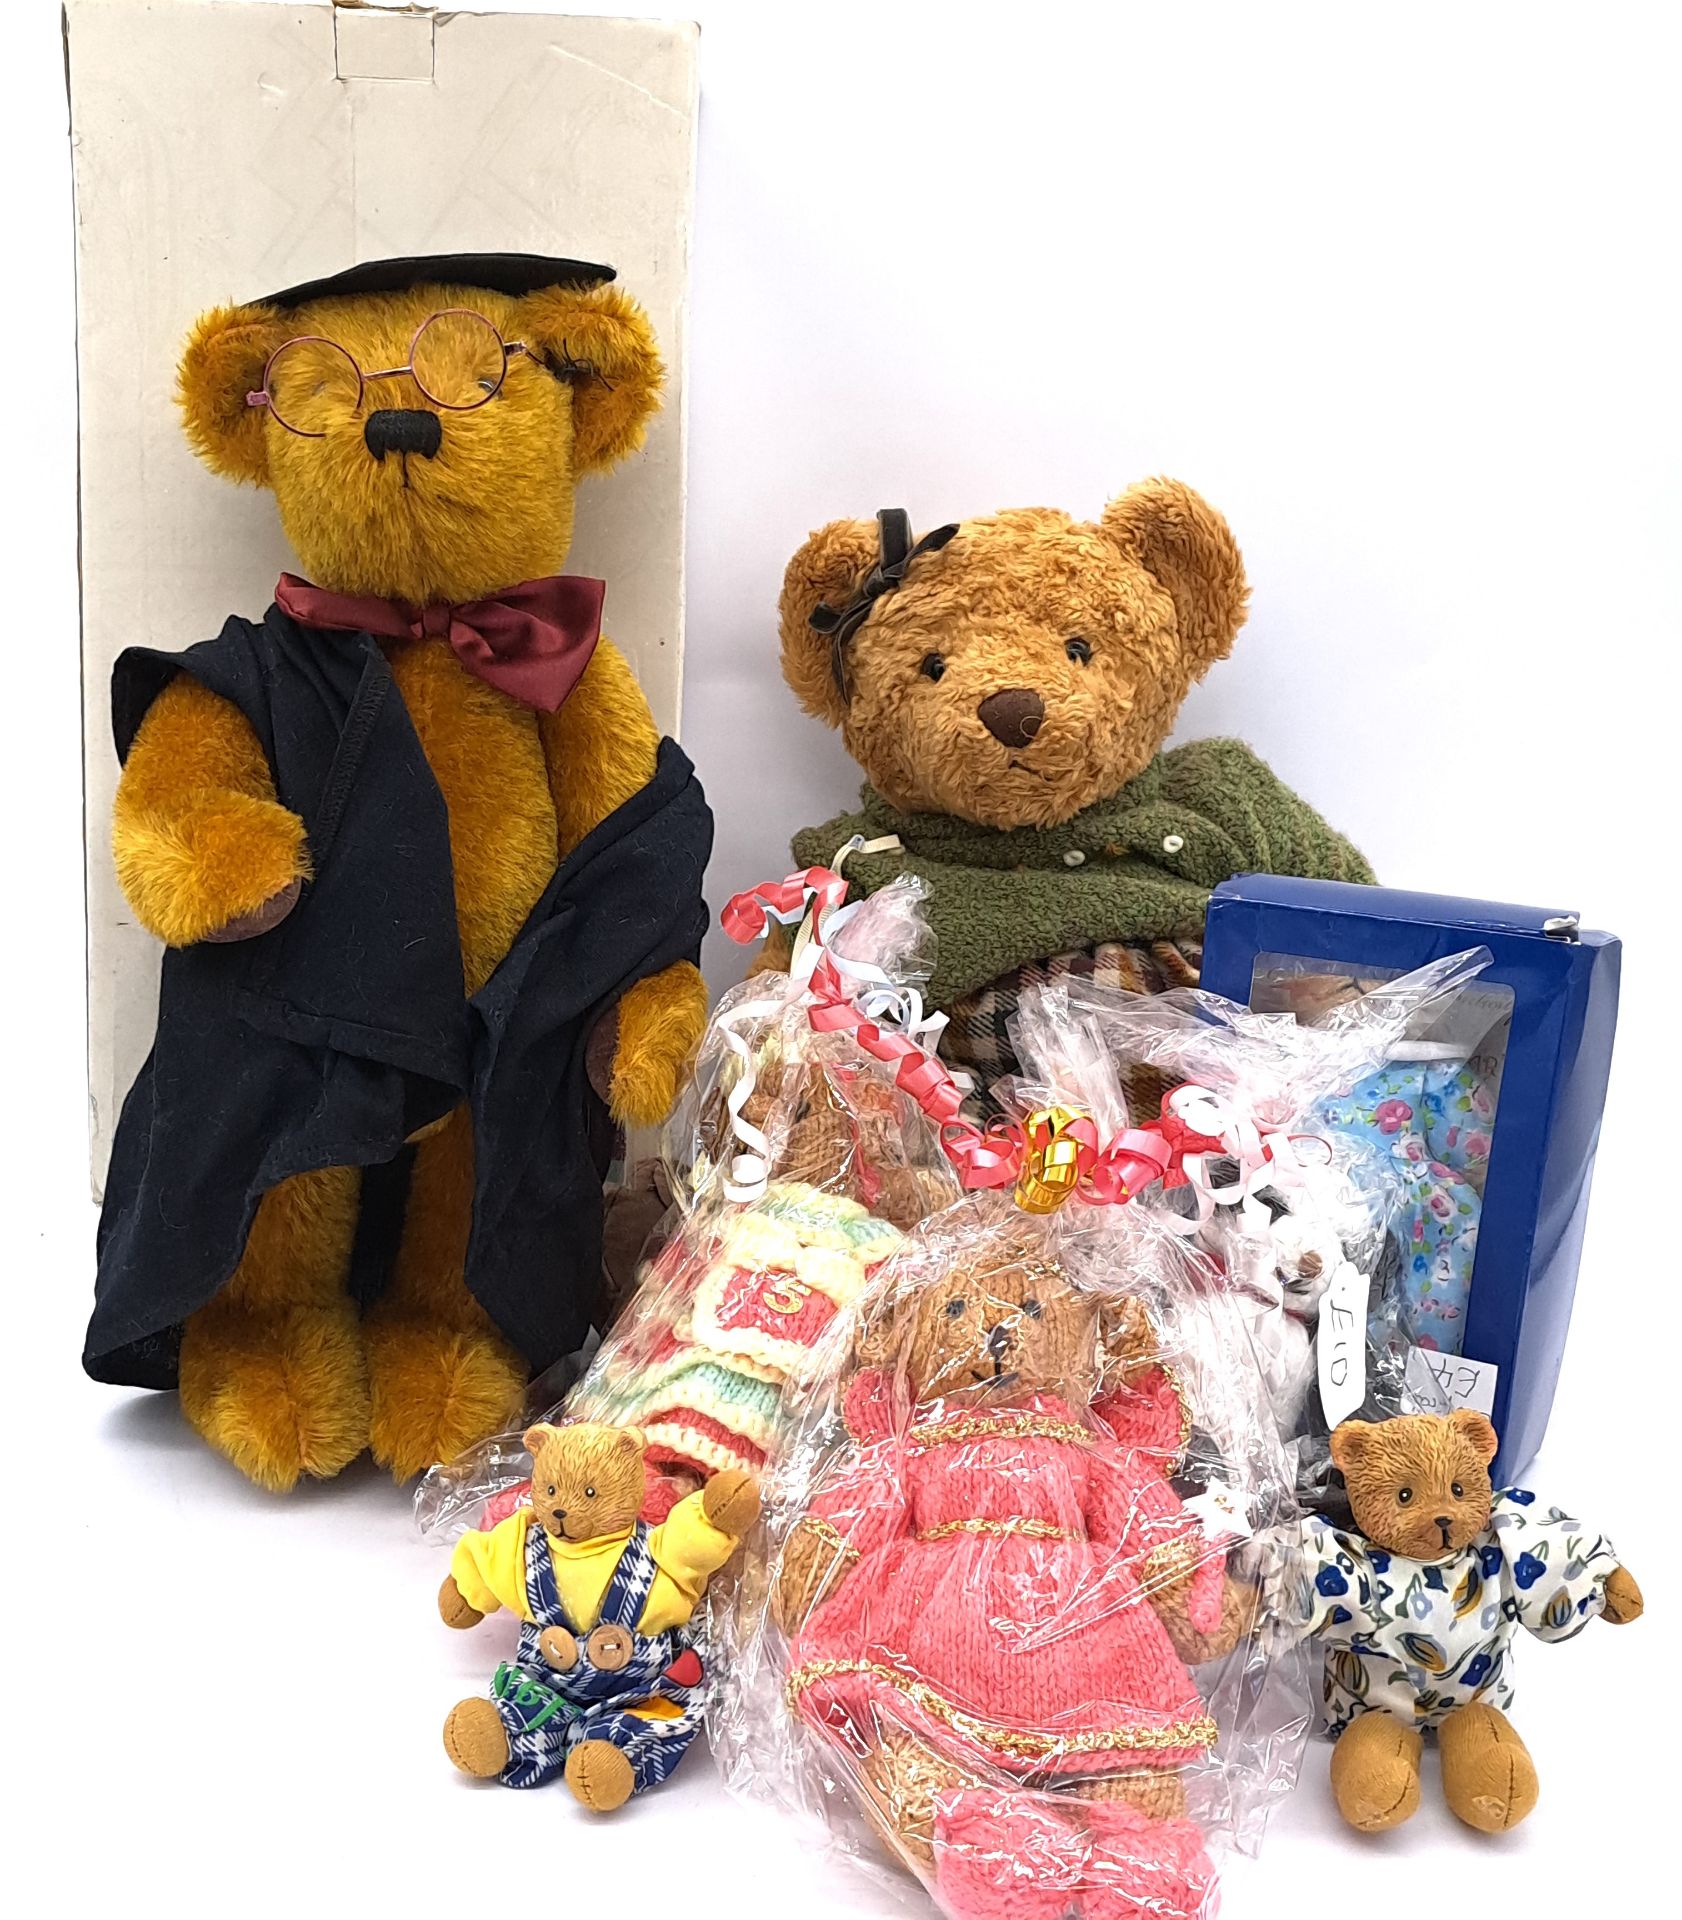 Assortment of modern and handmade teddy bears, including Past Times